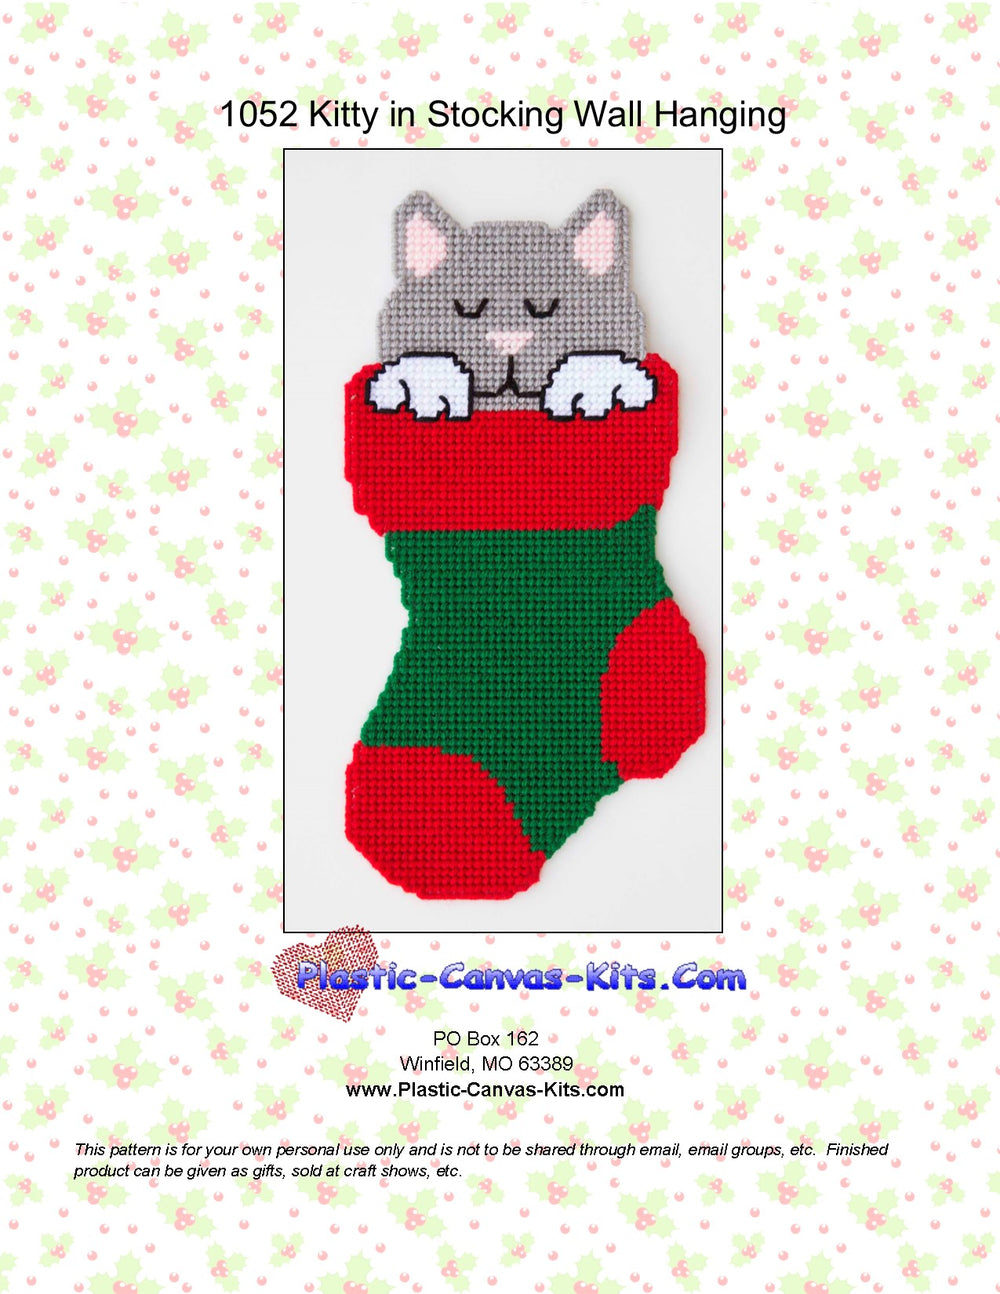 Christmas Kitty in Stocking Wall Hanging